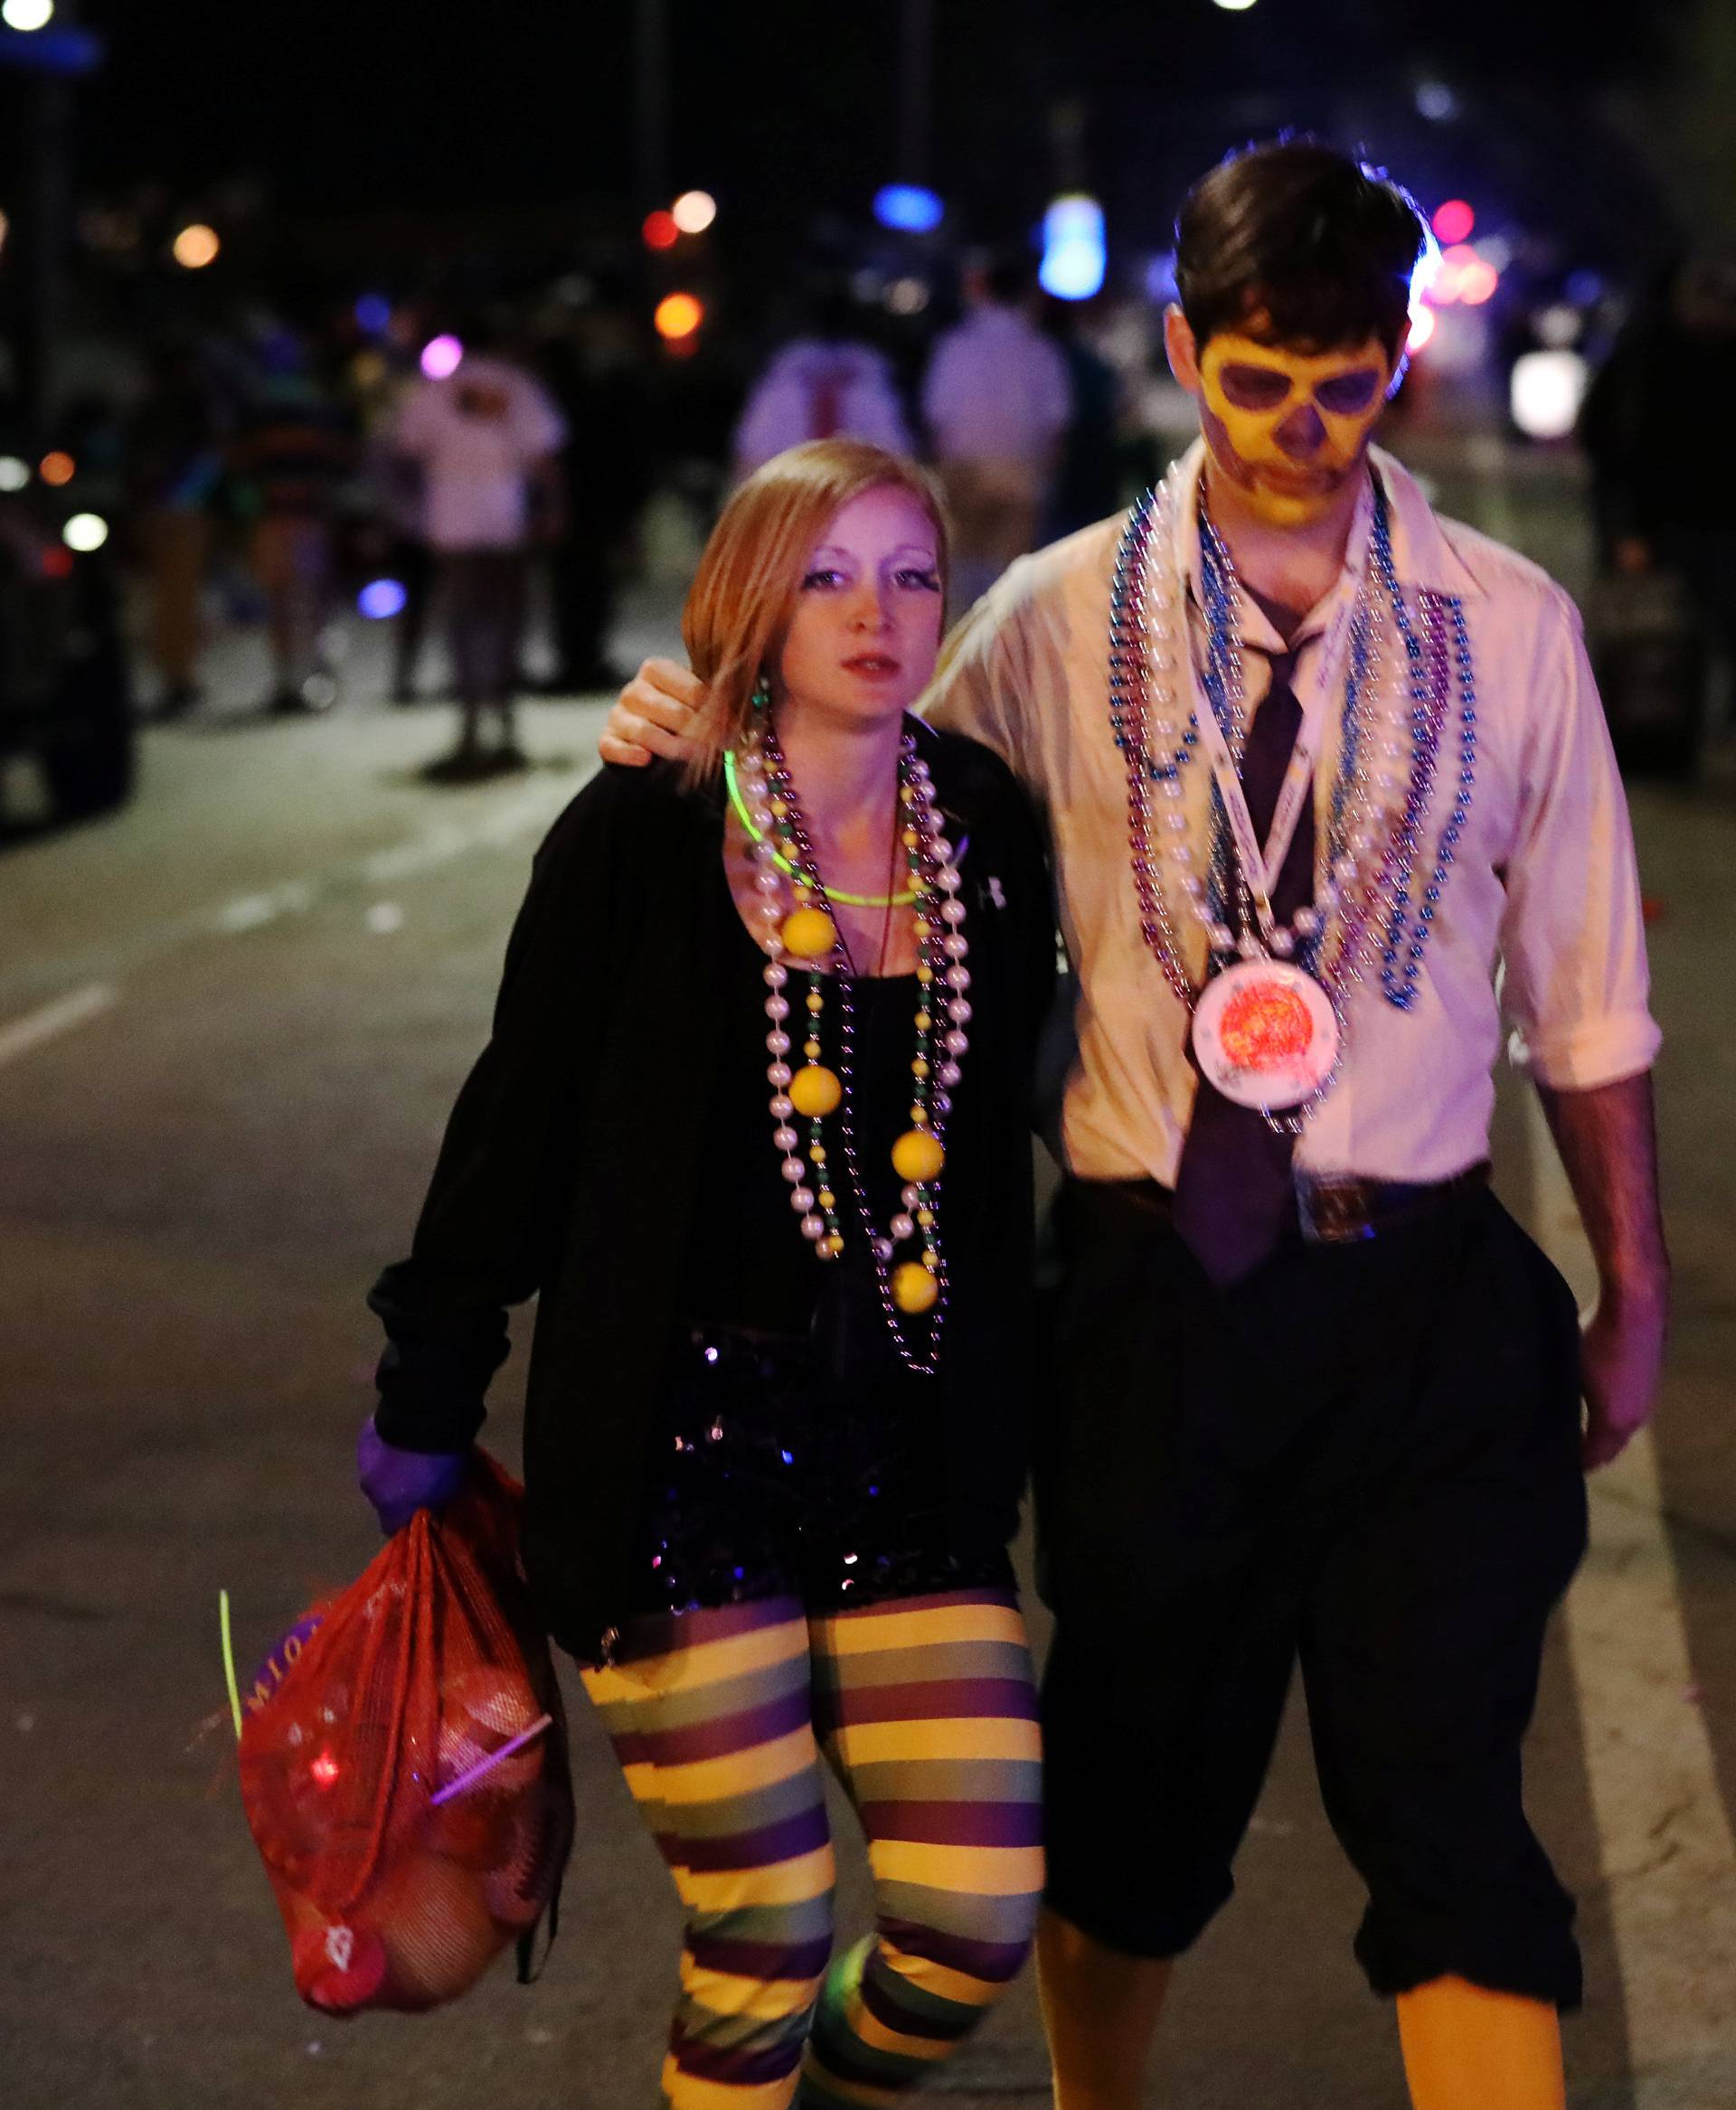 People walk away from the scene where a vehicle crashed along the Endymion parade route at Orleans and Carrollton during Mardi Gras in New Orleans, Louisiana